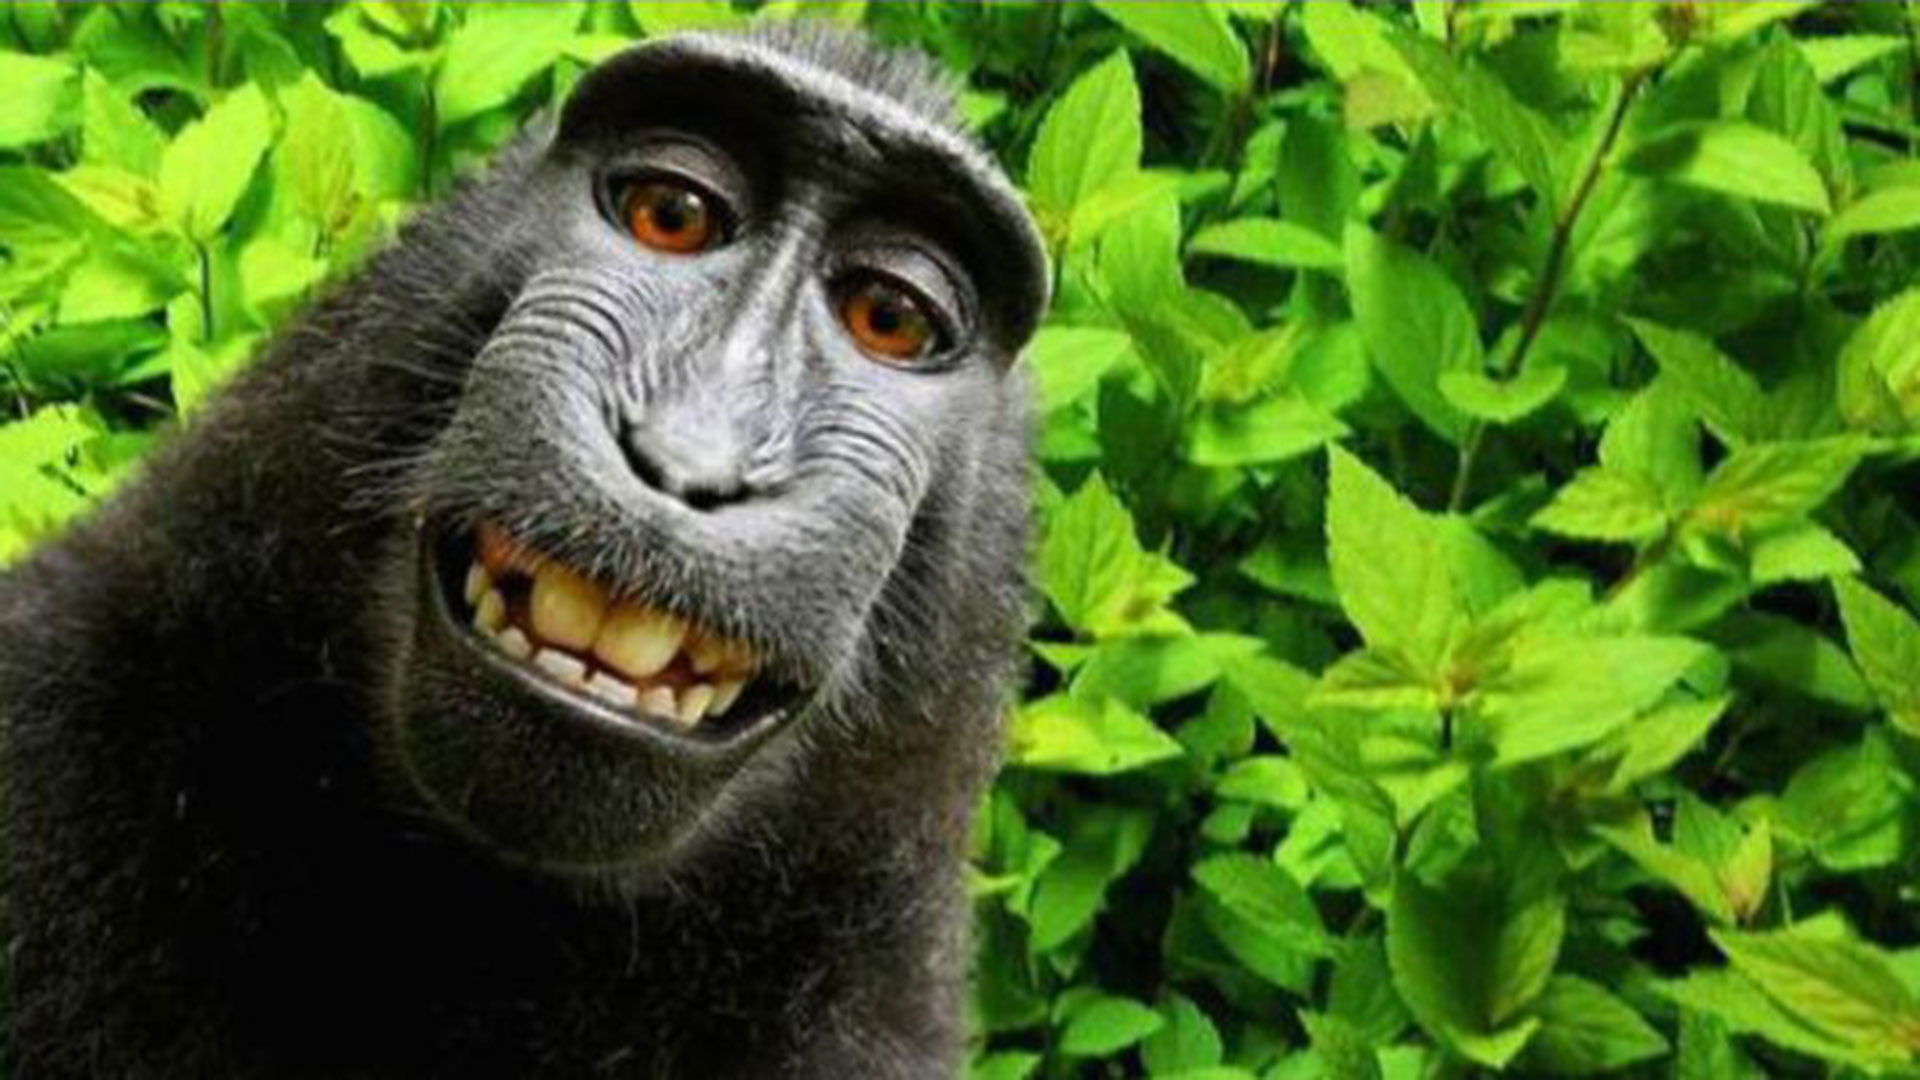 Naruto, the monkey that PETA wants to attribute the copyright to (David Slater)